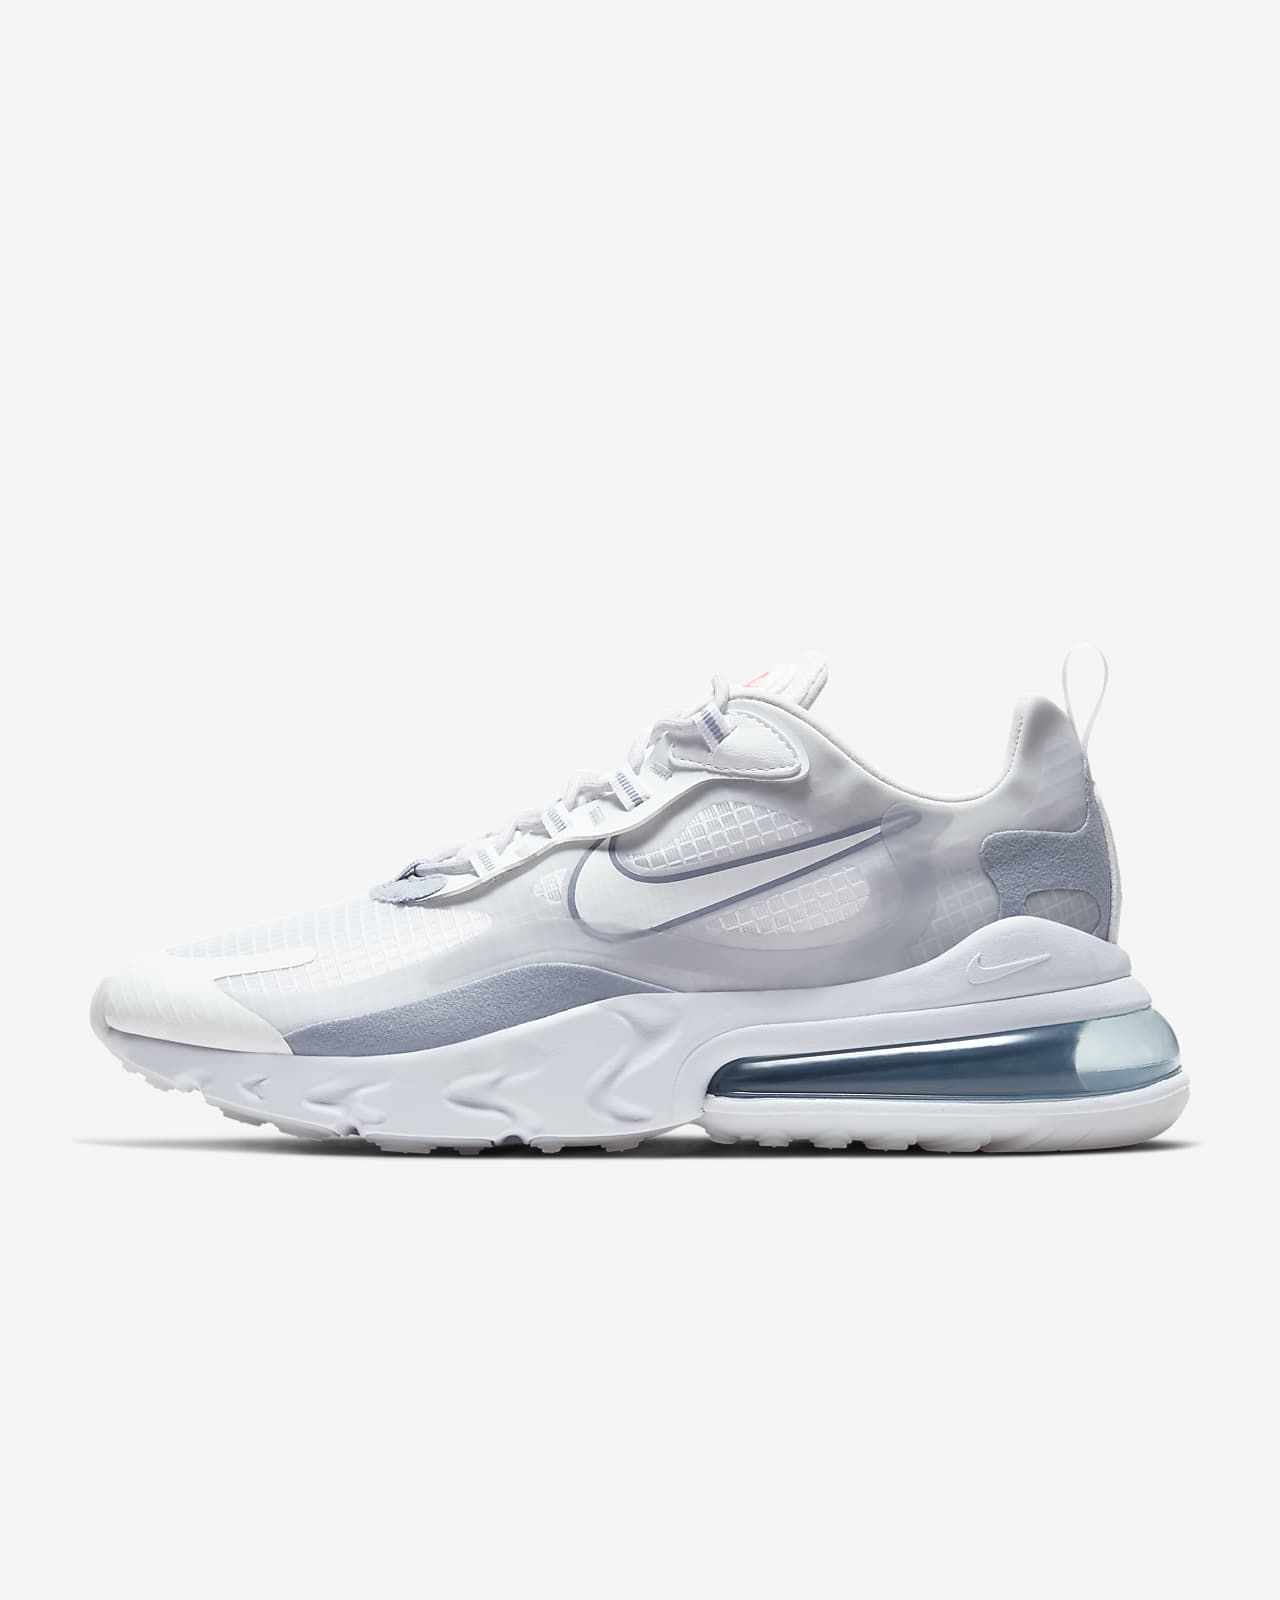 nike air max 270 cyber monday deals